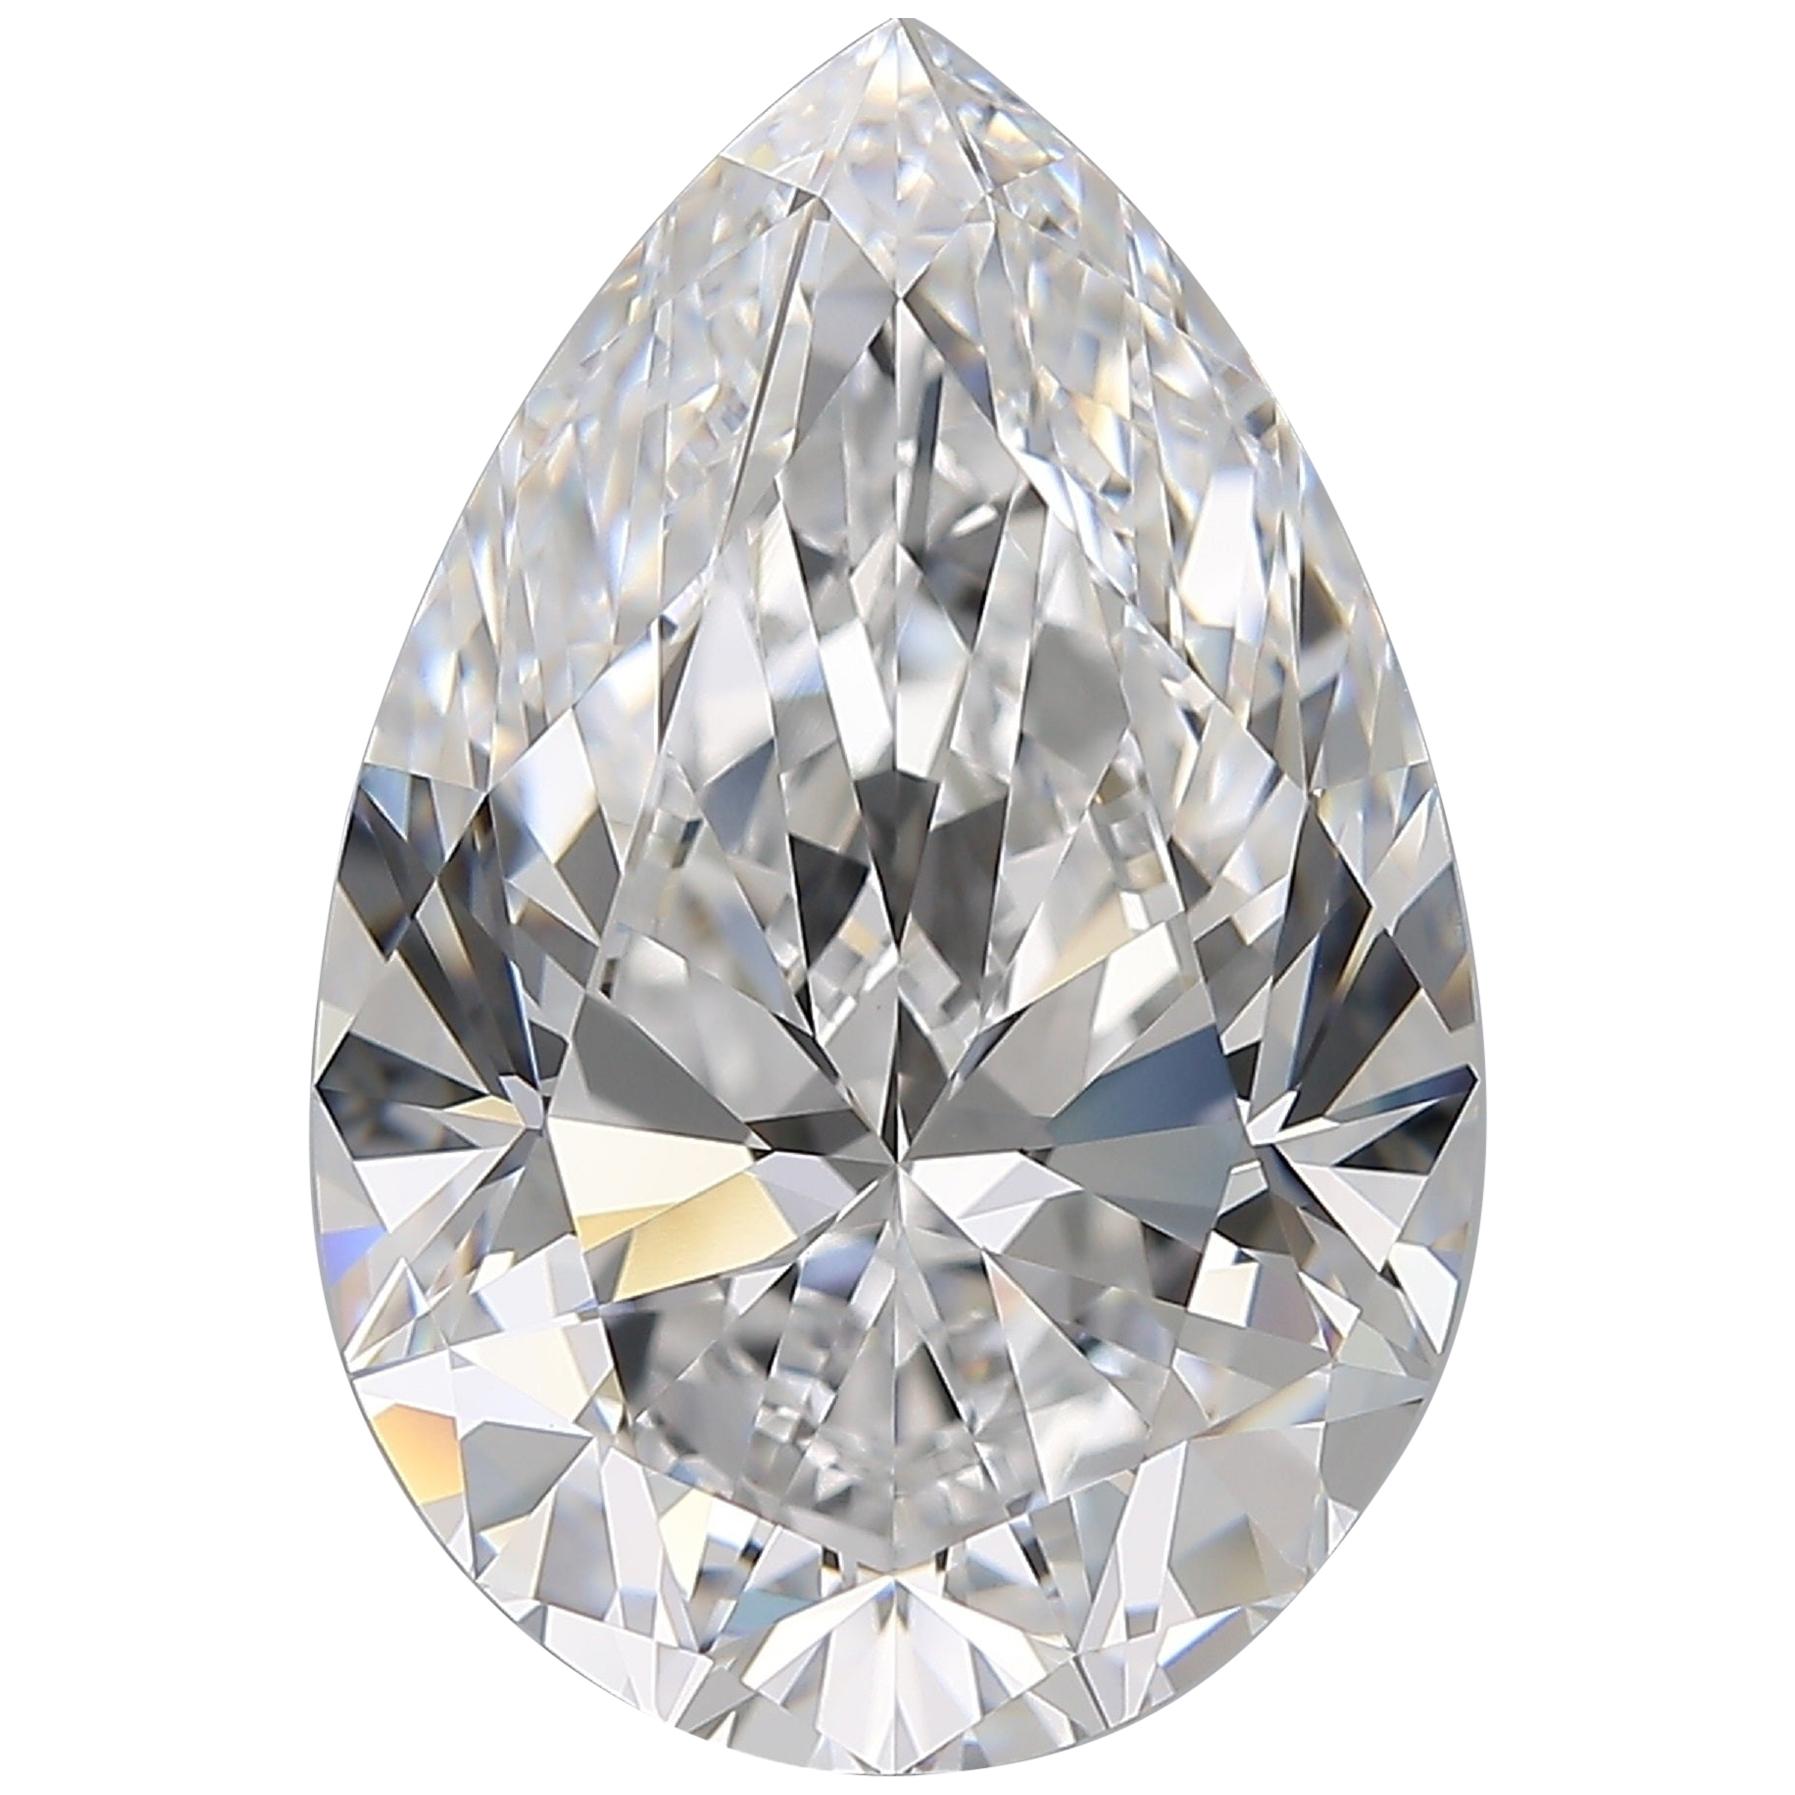 Flawless Clarity D Color GIA Certified 10 Carat Pear Cut Diamond